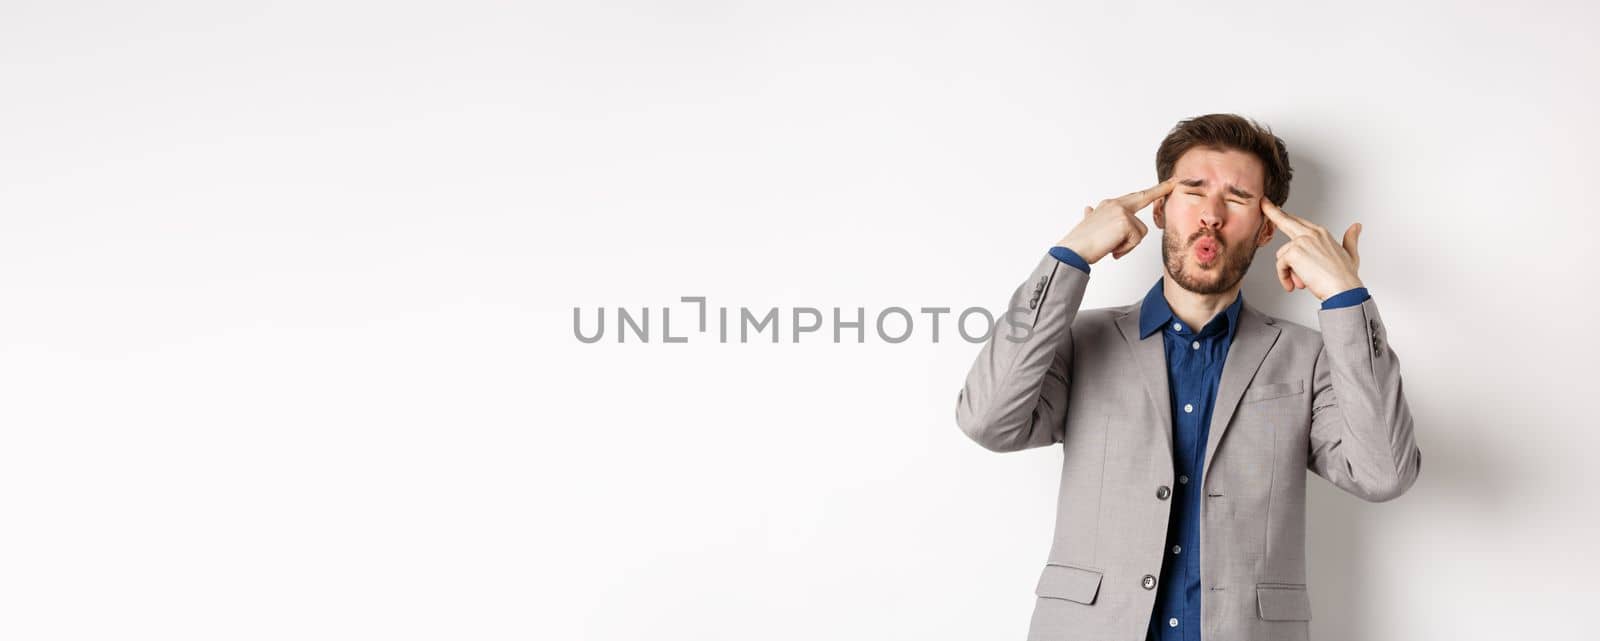 Distressed and tensed businessman pointing at head and complaining, feeling annoyed with situation blowing his mind, standing bothered on white background.